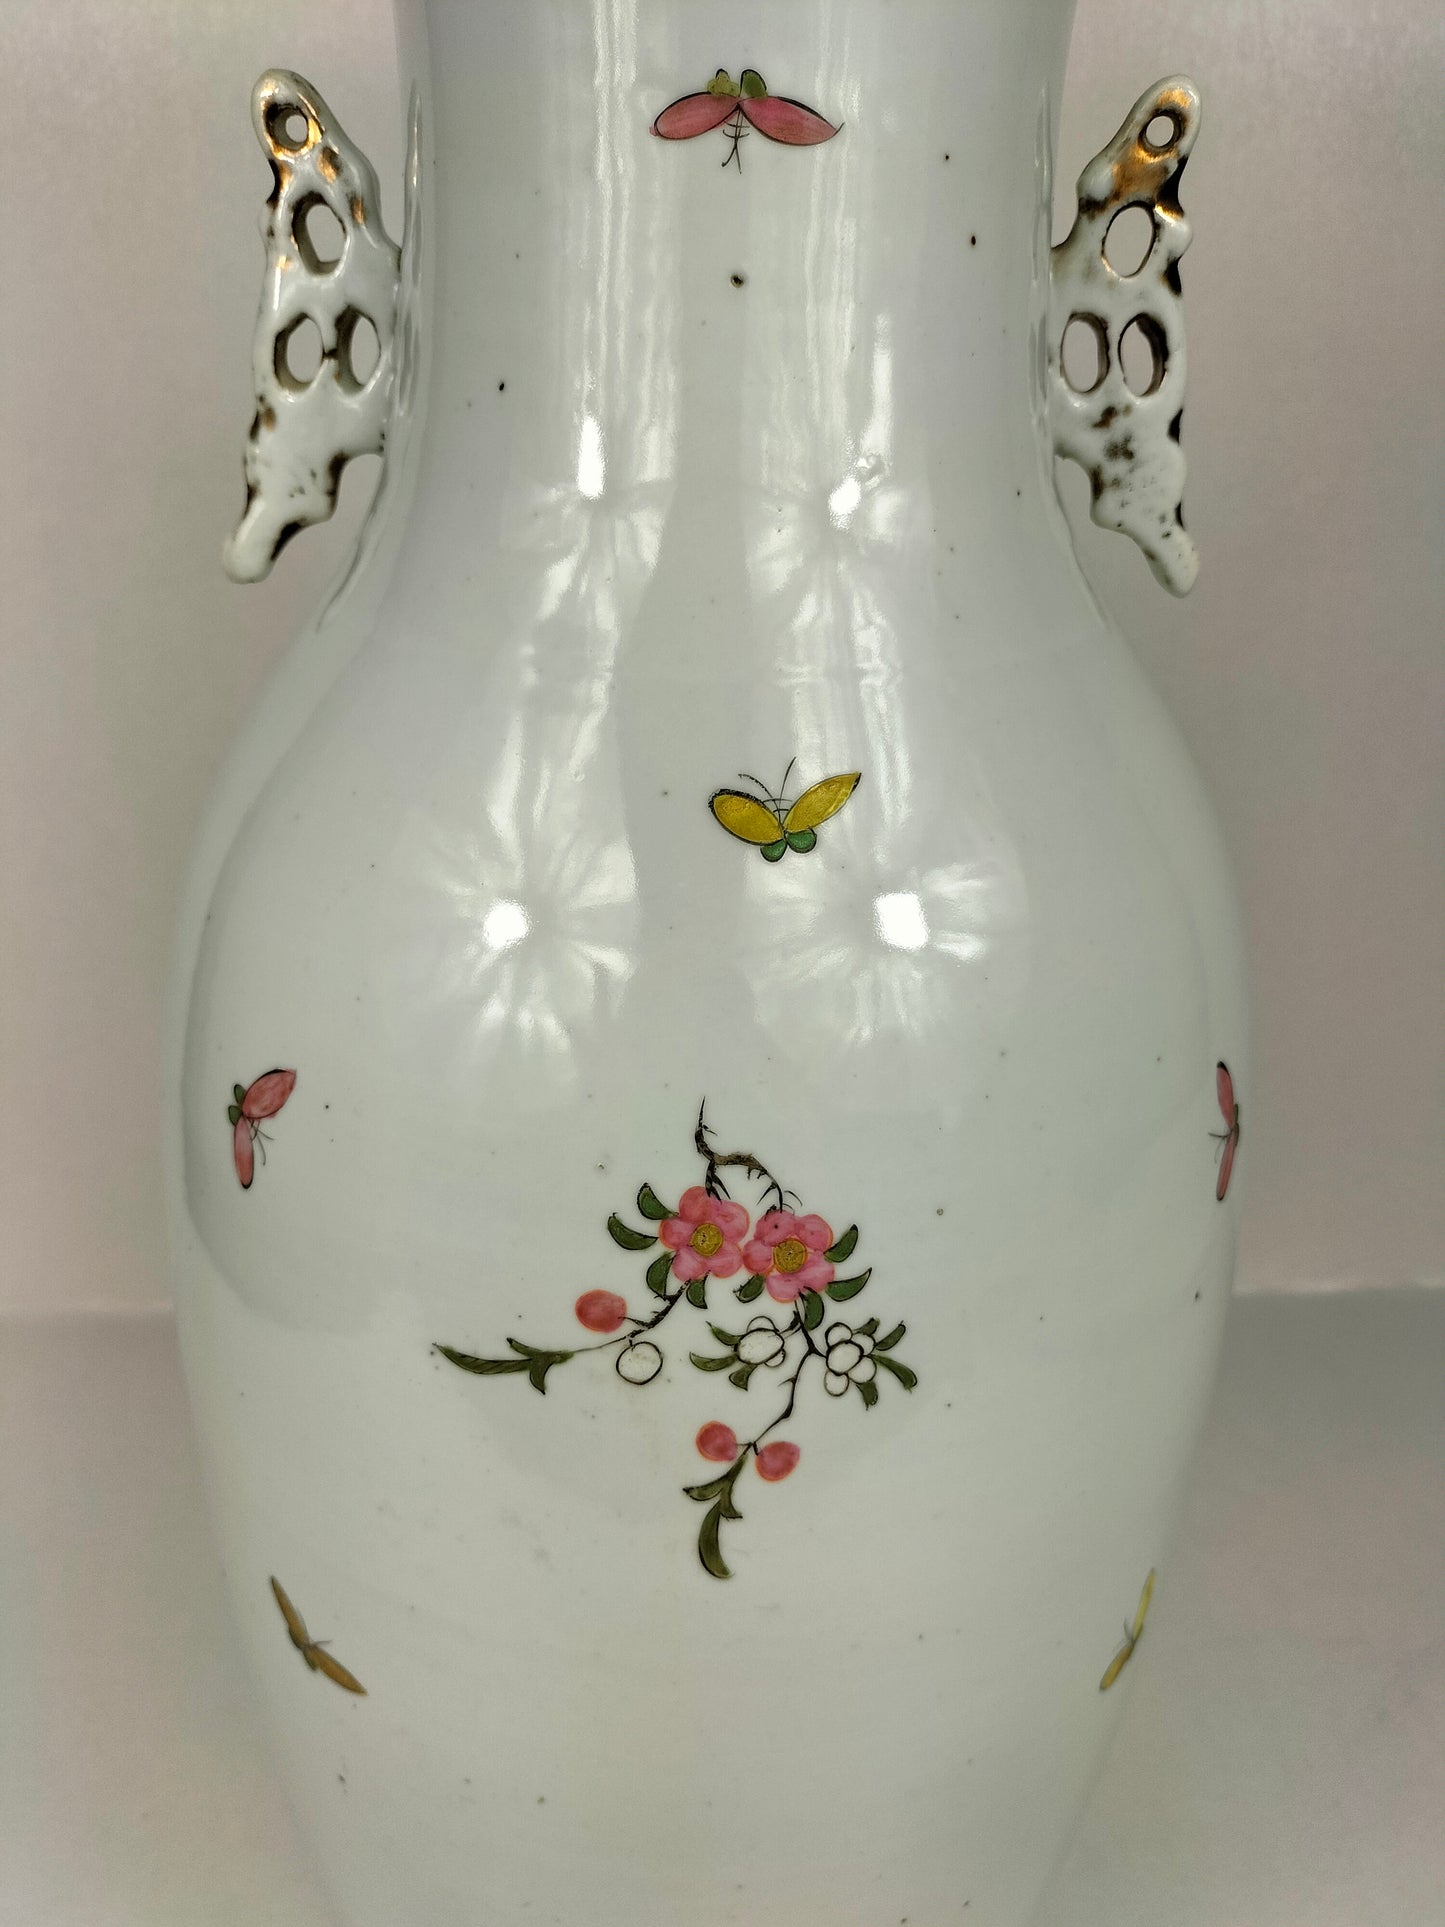 Large antique Chinese famille rose vase decorated with flowers and birds // Republic Period (1912-1949)